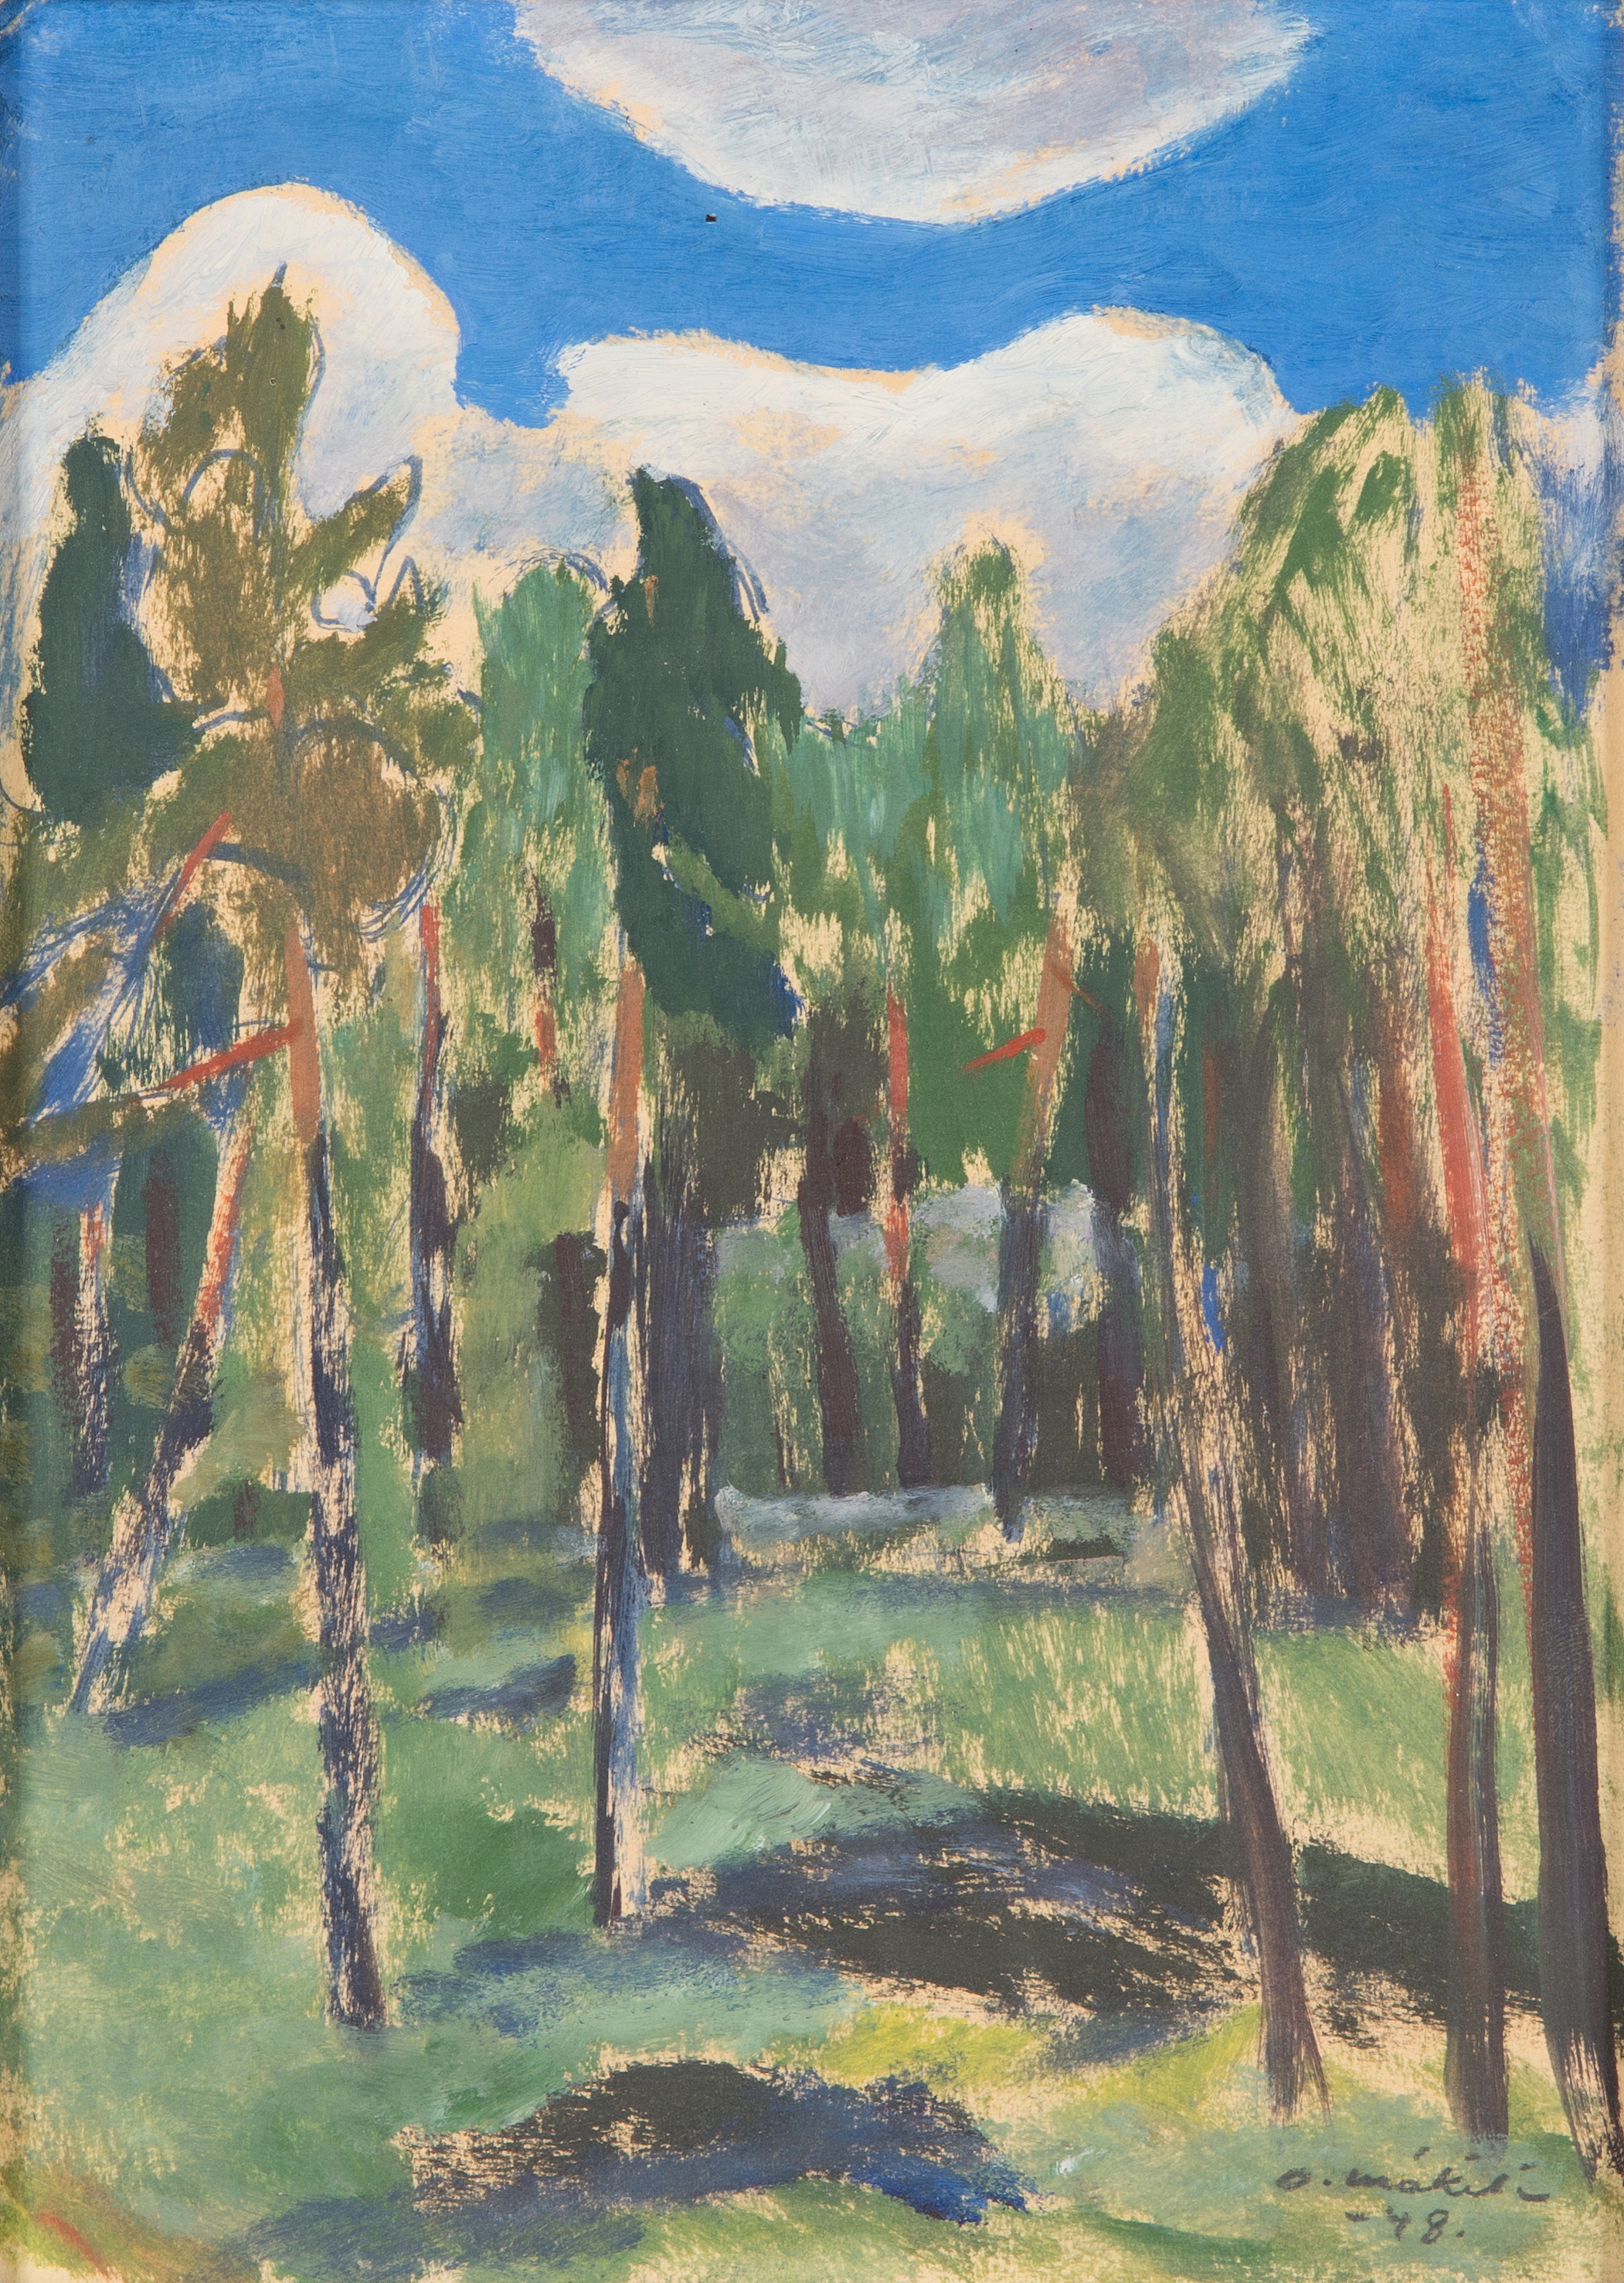 Artwork by Otto Mäkilä, Untitled, Made of Oil on board